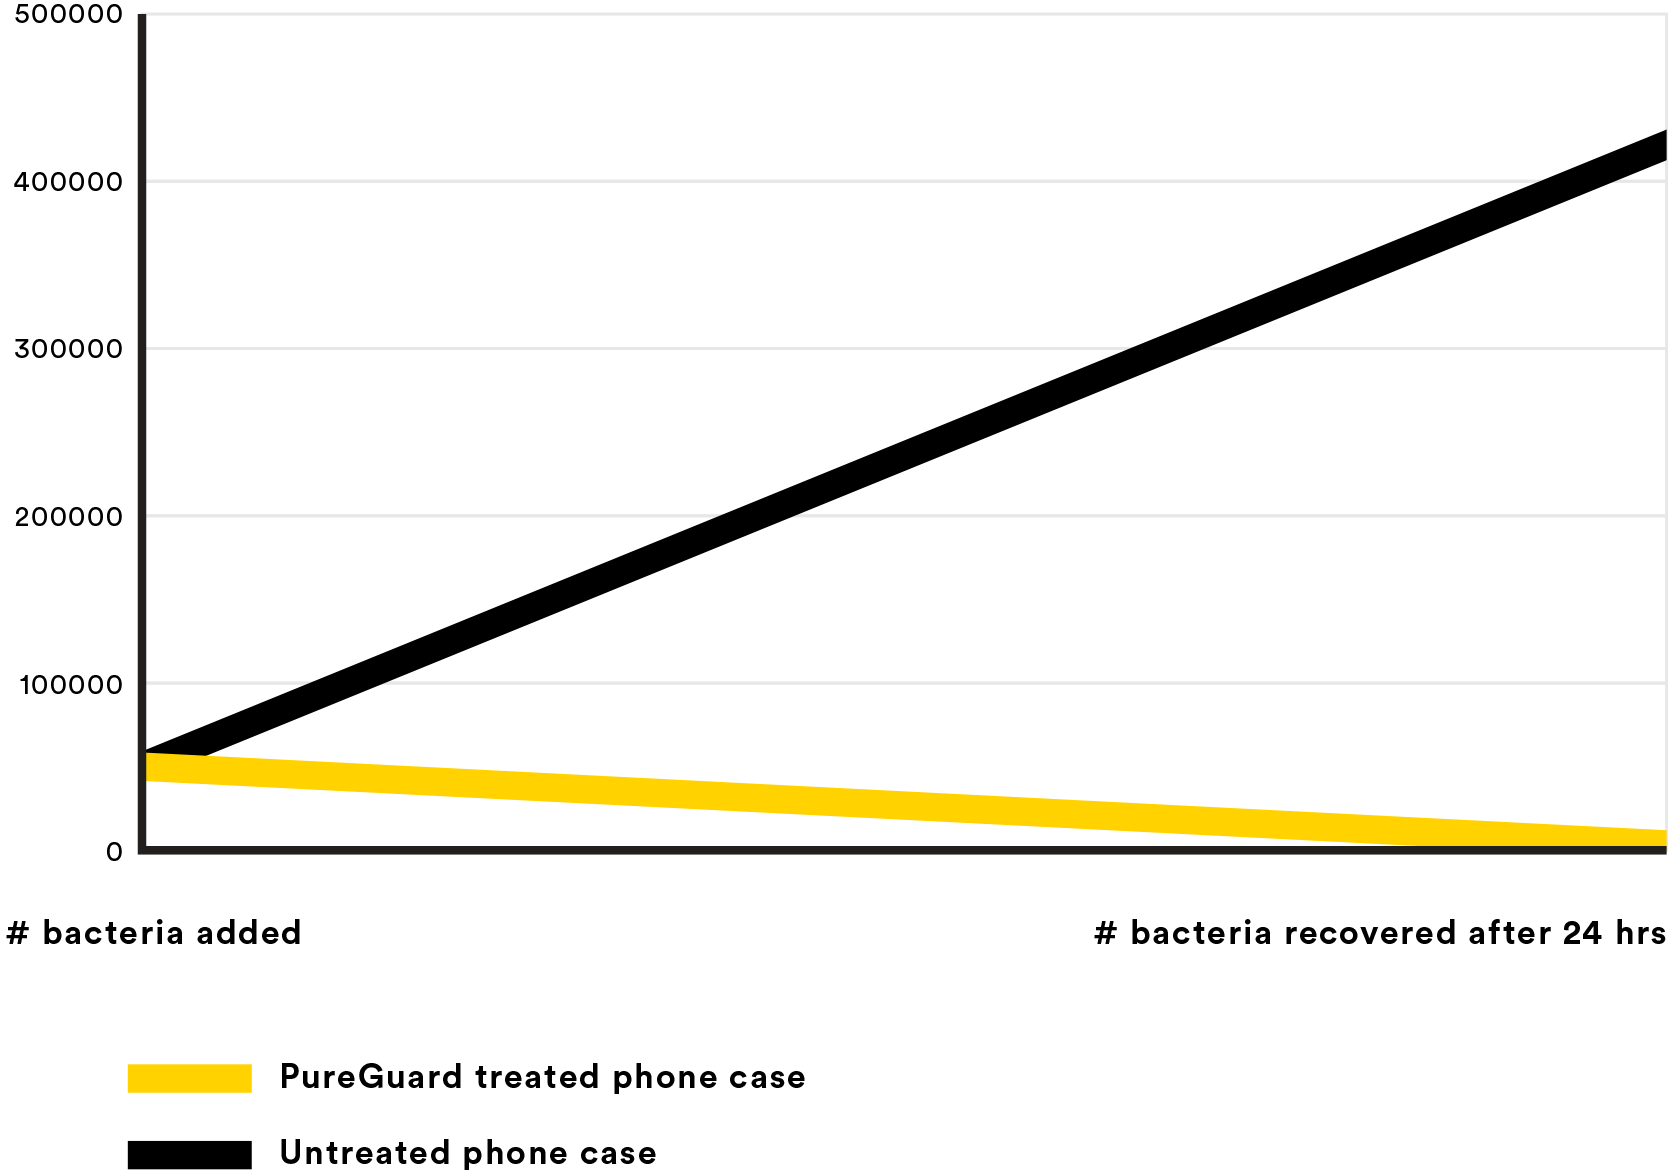 Graph showing the amount of bacteria PureGuard treated products can destroy over 24 hours.